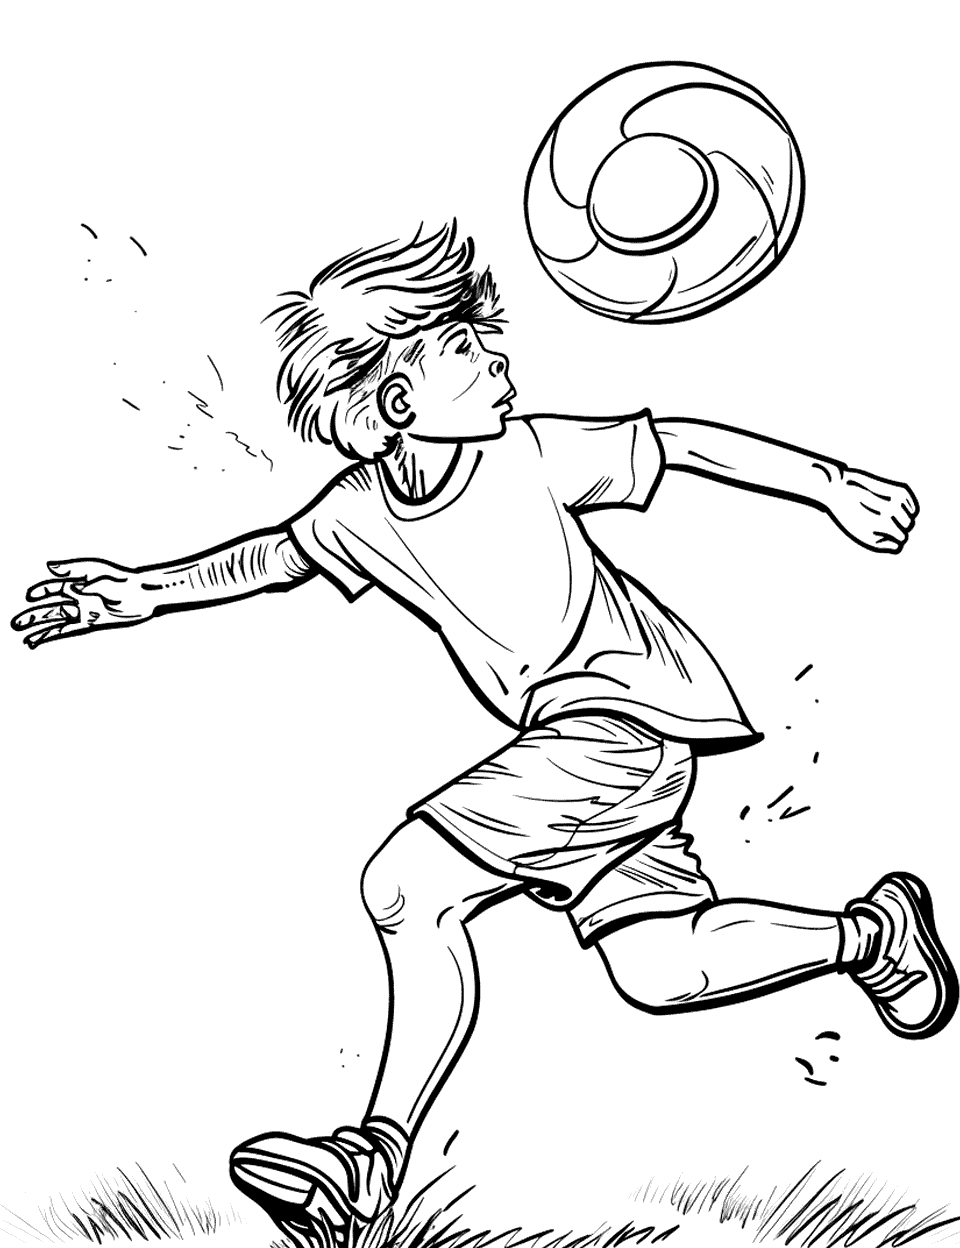 Ultimate Frisbee Catch Sports Coloring Page - A player rushing to catch a frisbee in an open field.